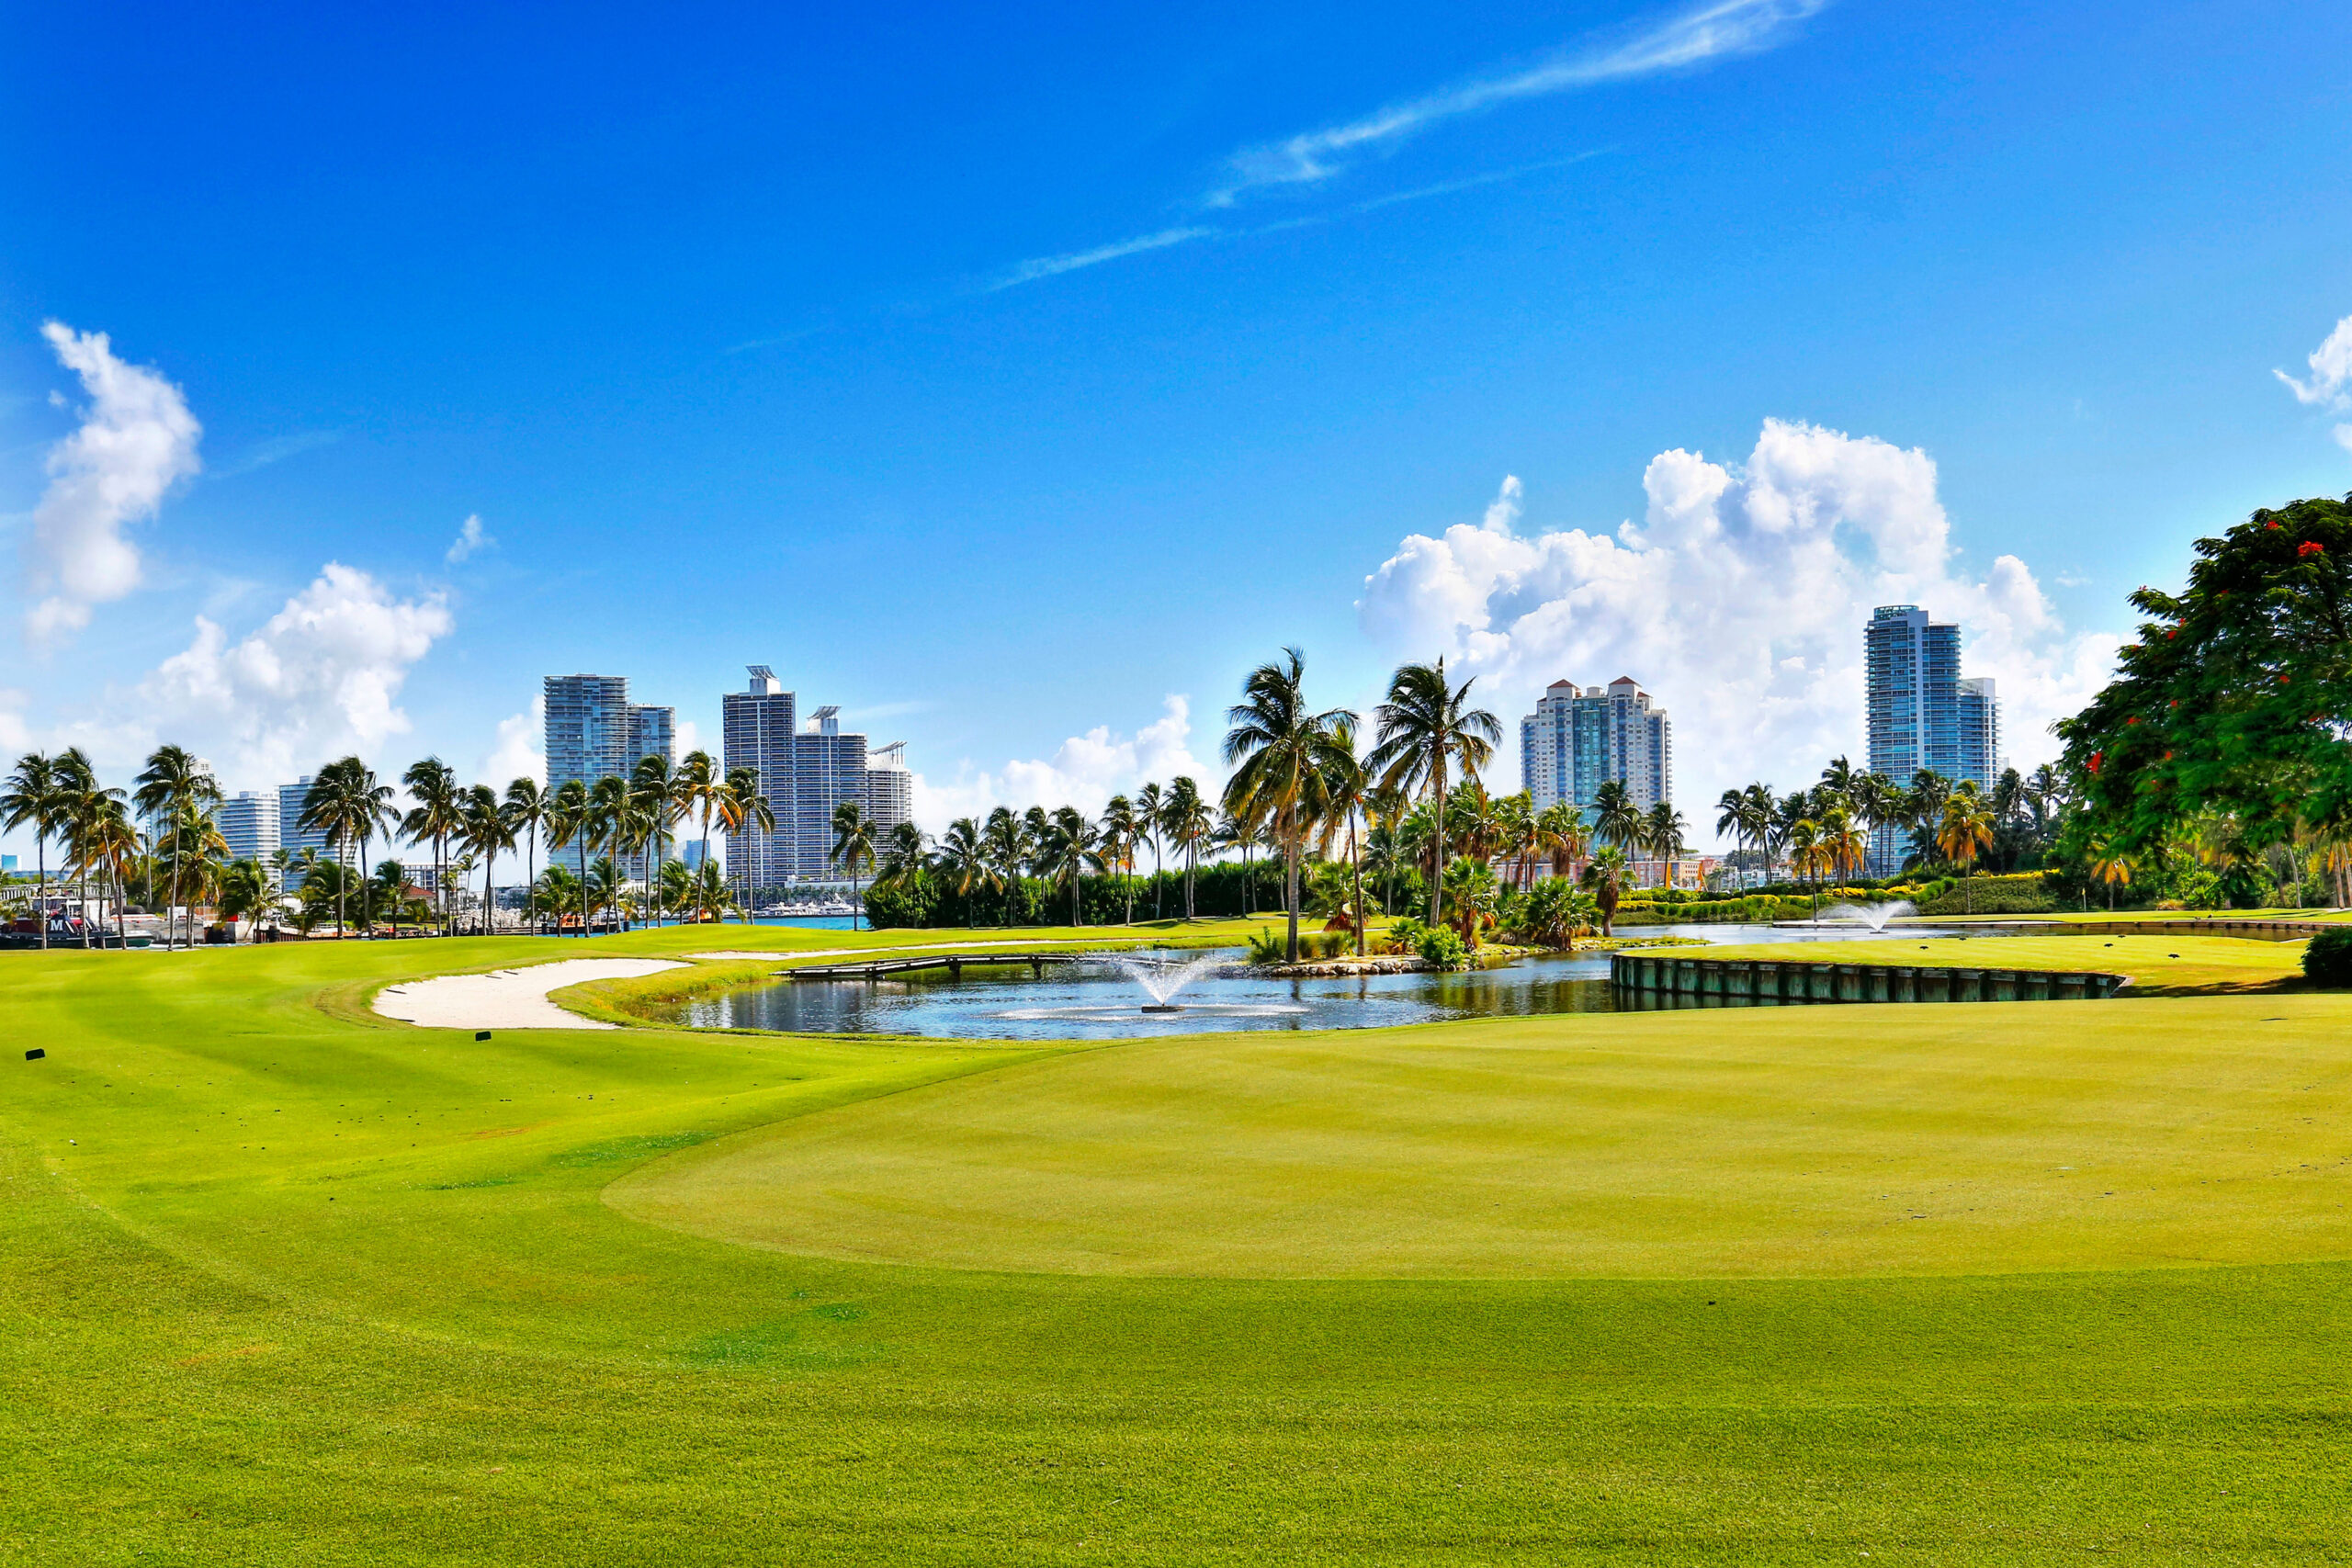 Fisher Island: The Beacon of Refined Living